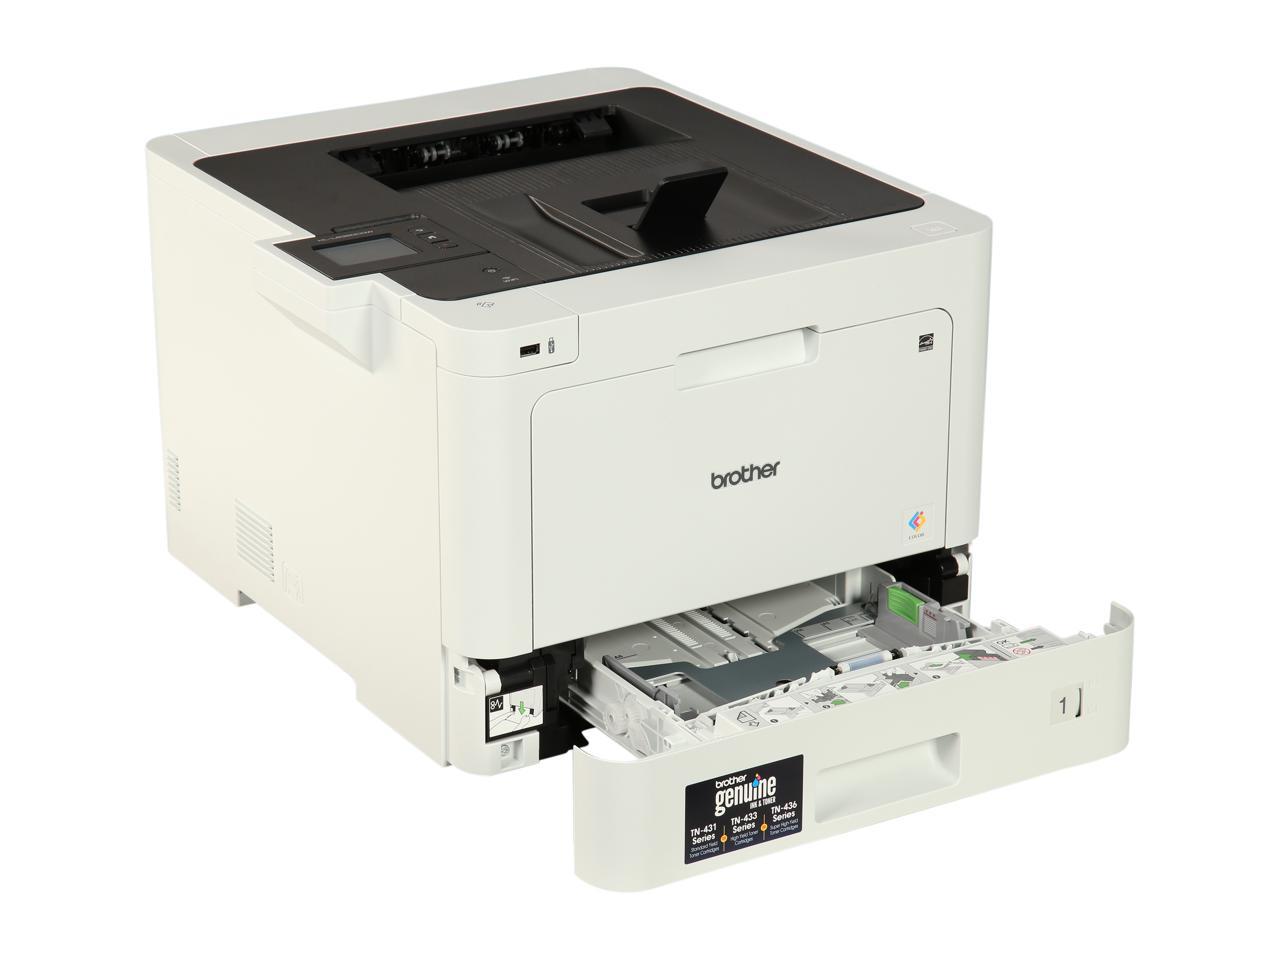 Brother Hl L8360cdw Business Wireless Color Laser Printer With Automatic Duplex Printing Mobile 9756